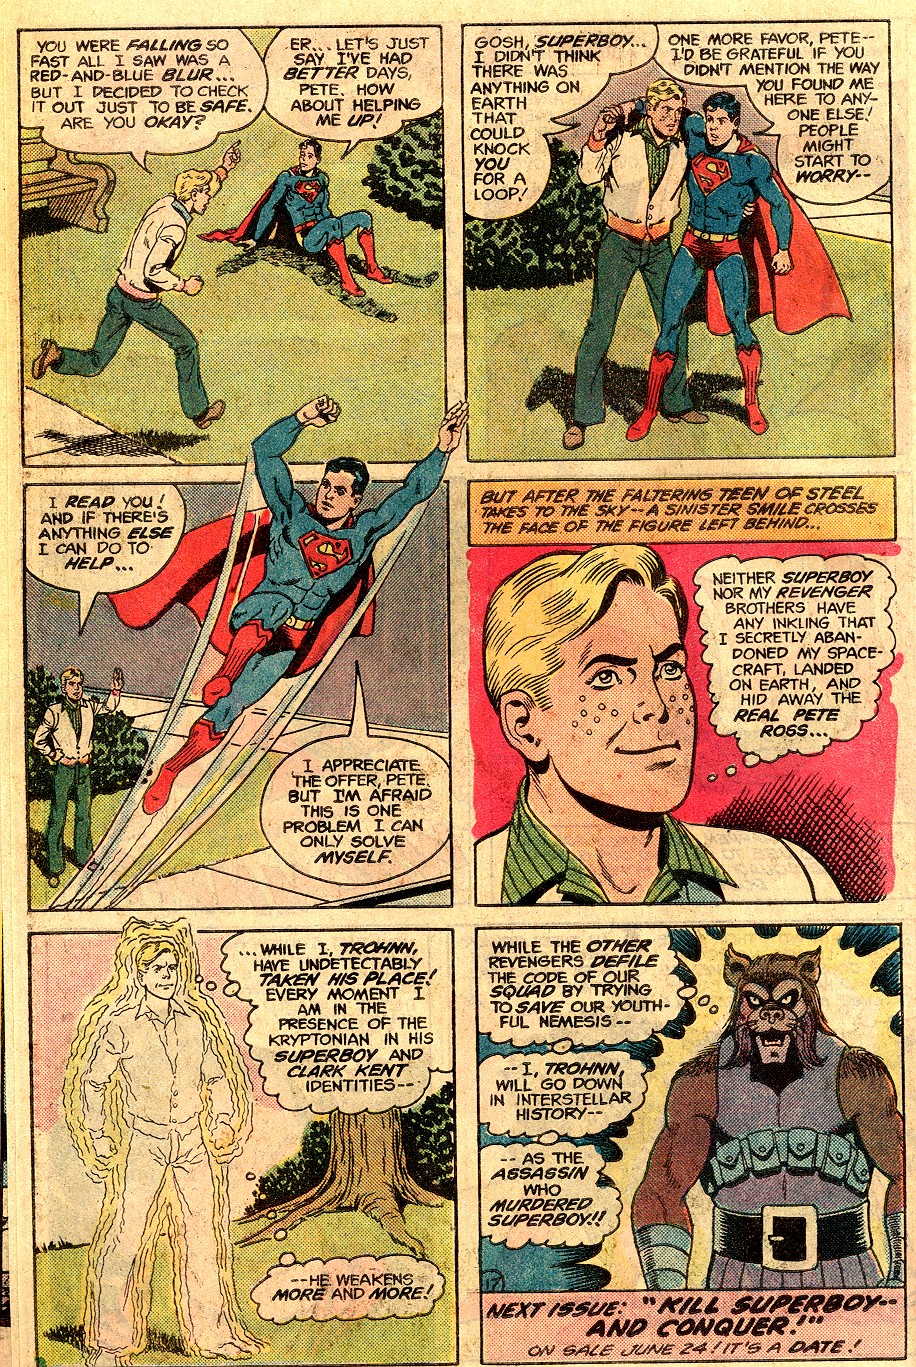 The New Adventures of Superboy 32 Page 21